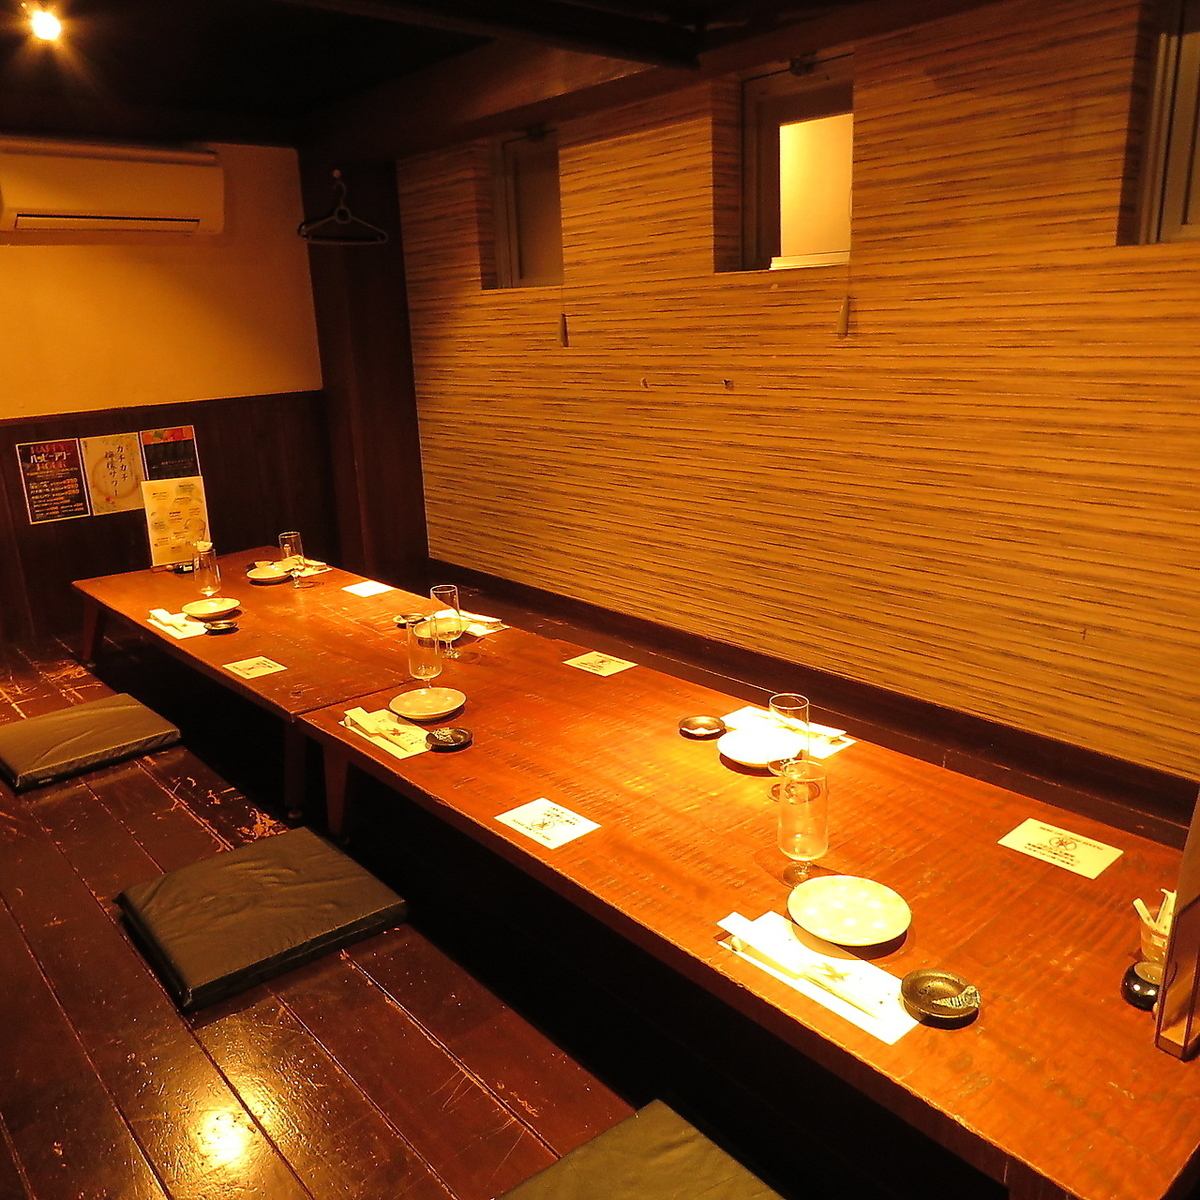 We have many private rooms available, so please inquire.